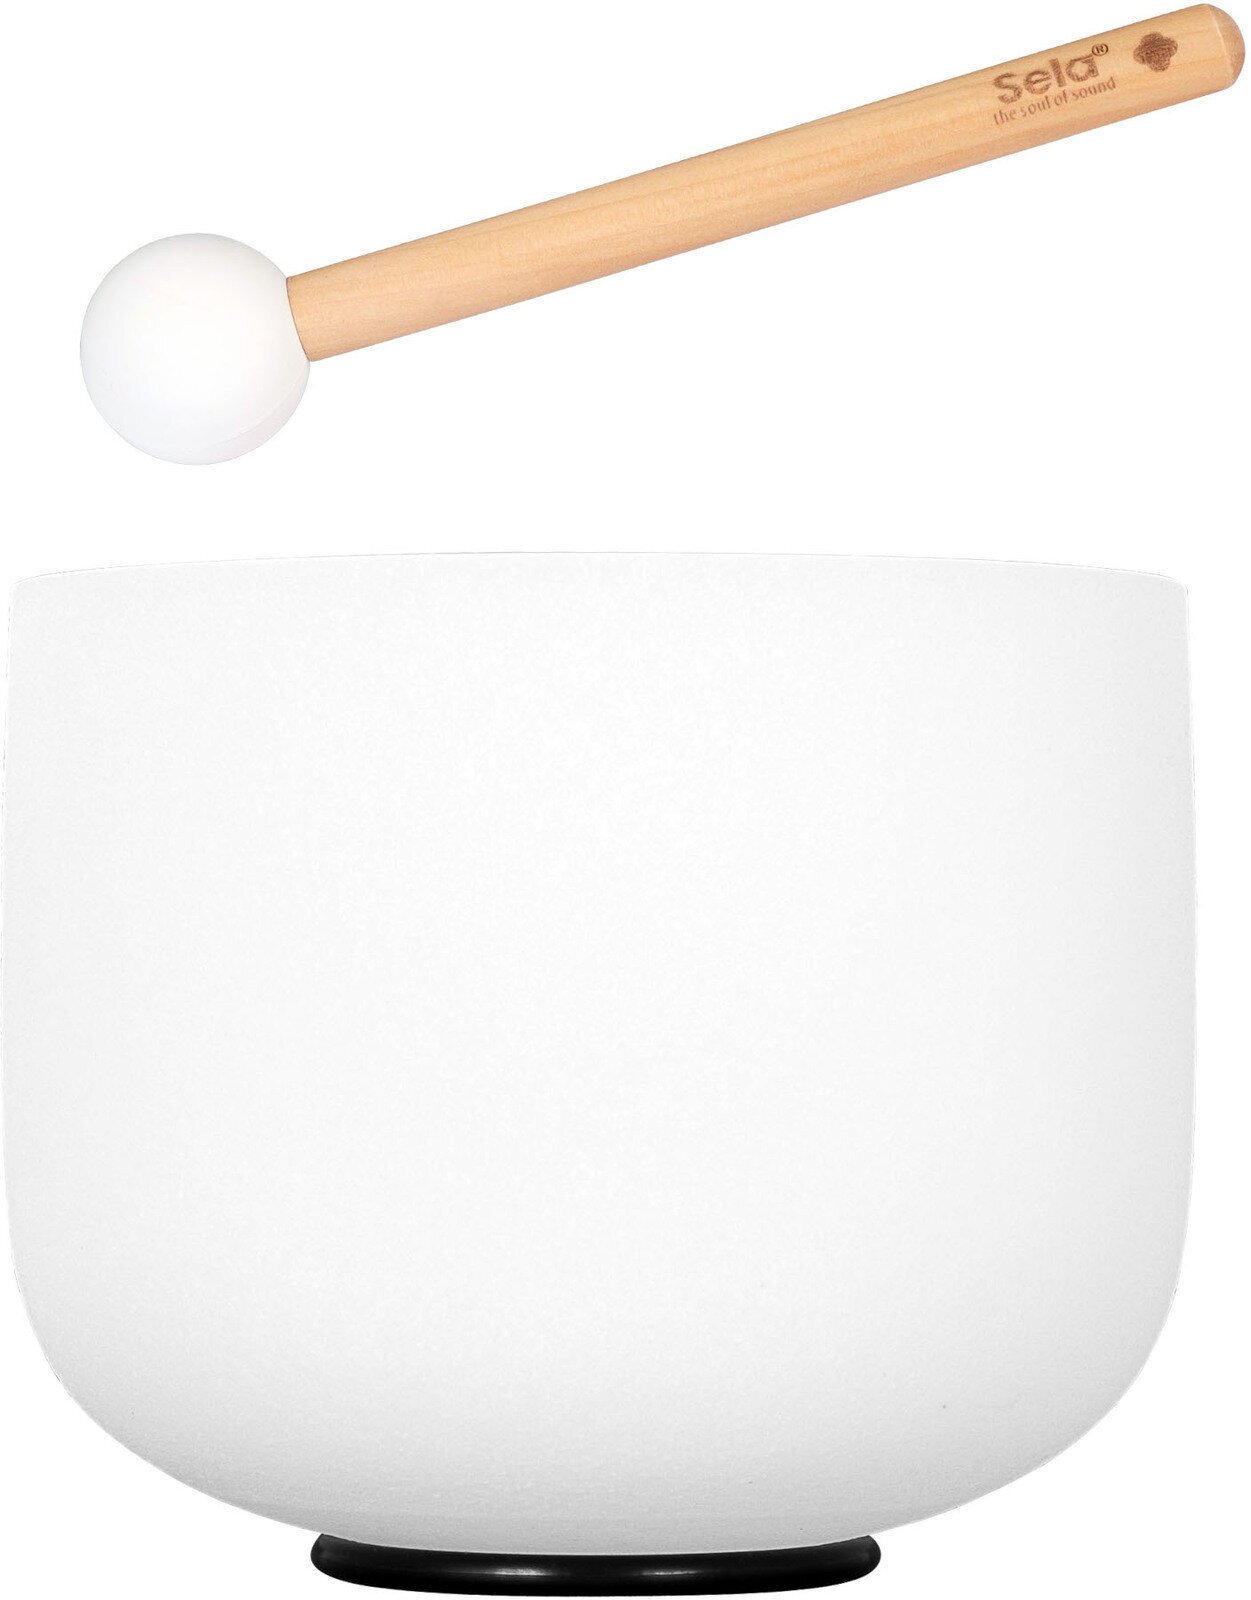 Percussions musicothérapeutiques Sela 8" Crystal Singing Bowl Frosted 432 Hz G incl. 1 Wood Mallet